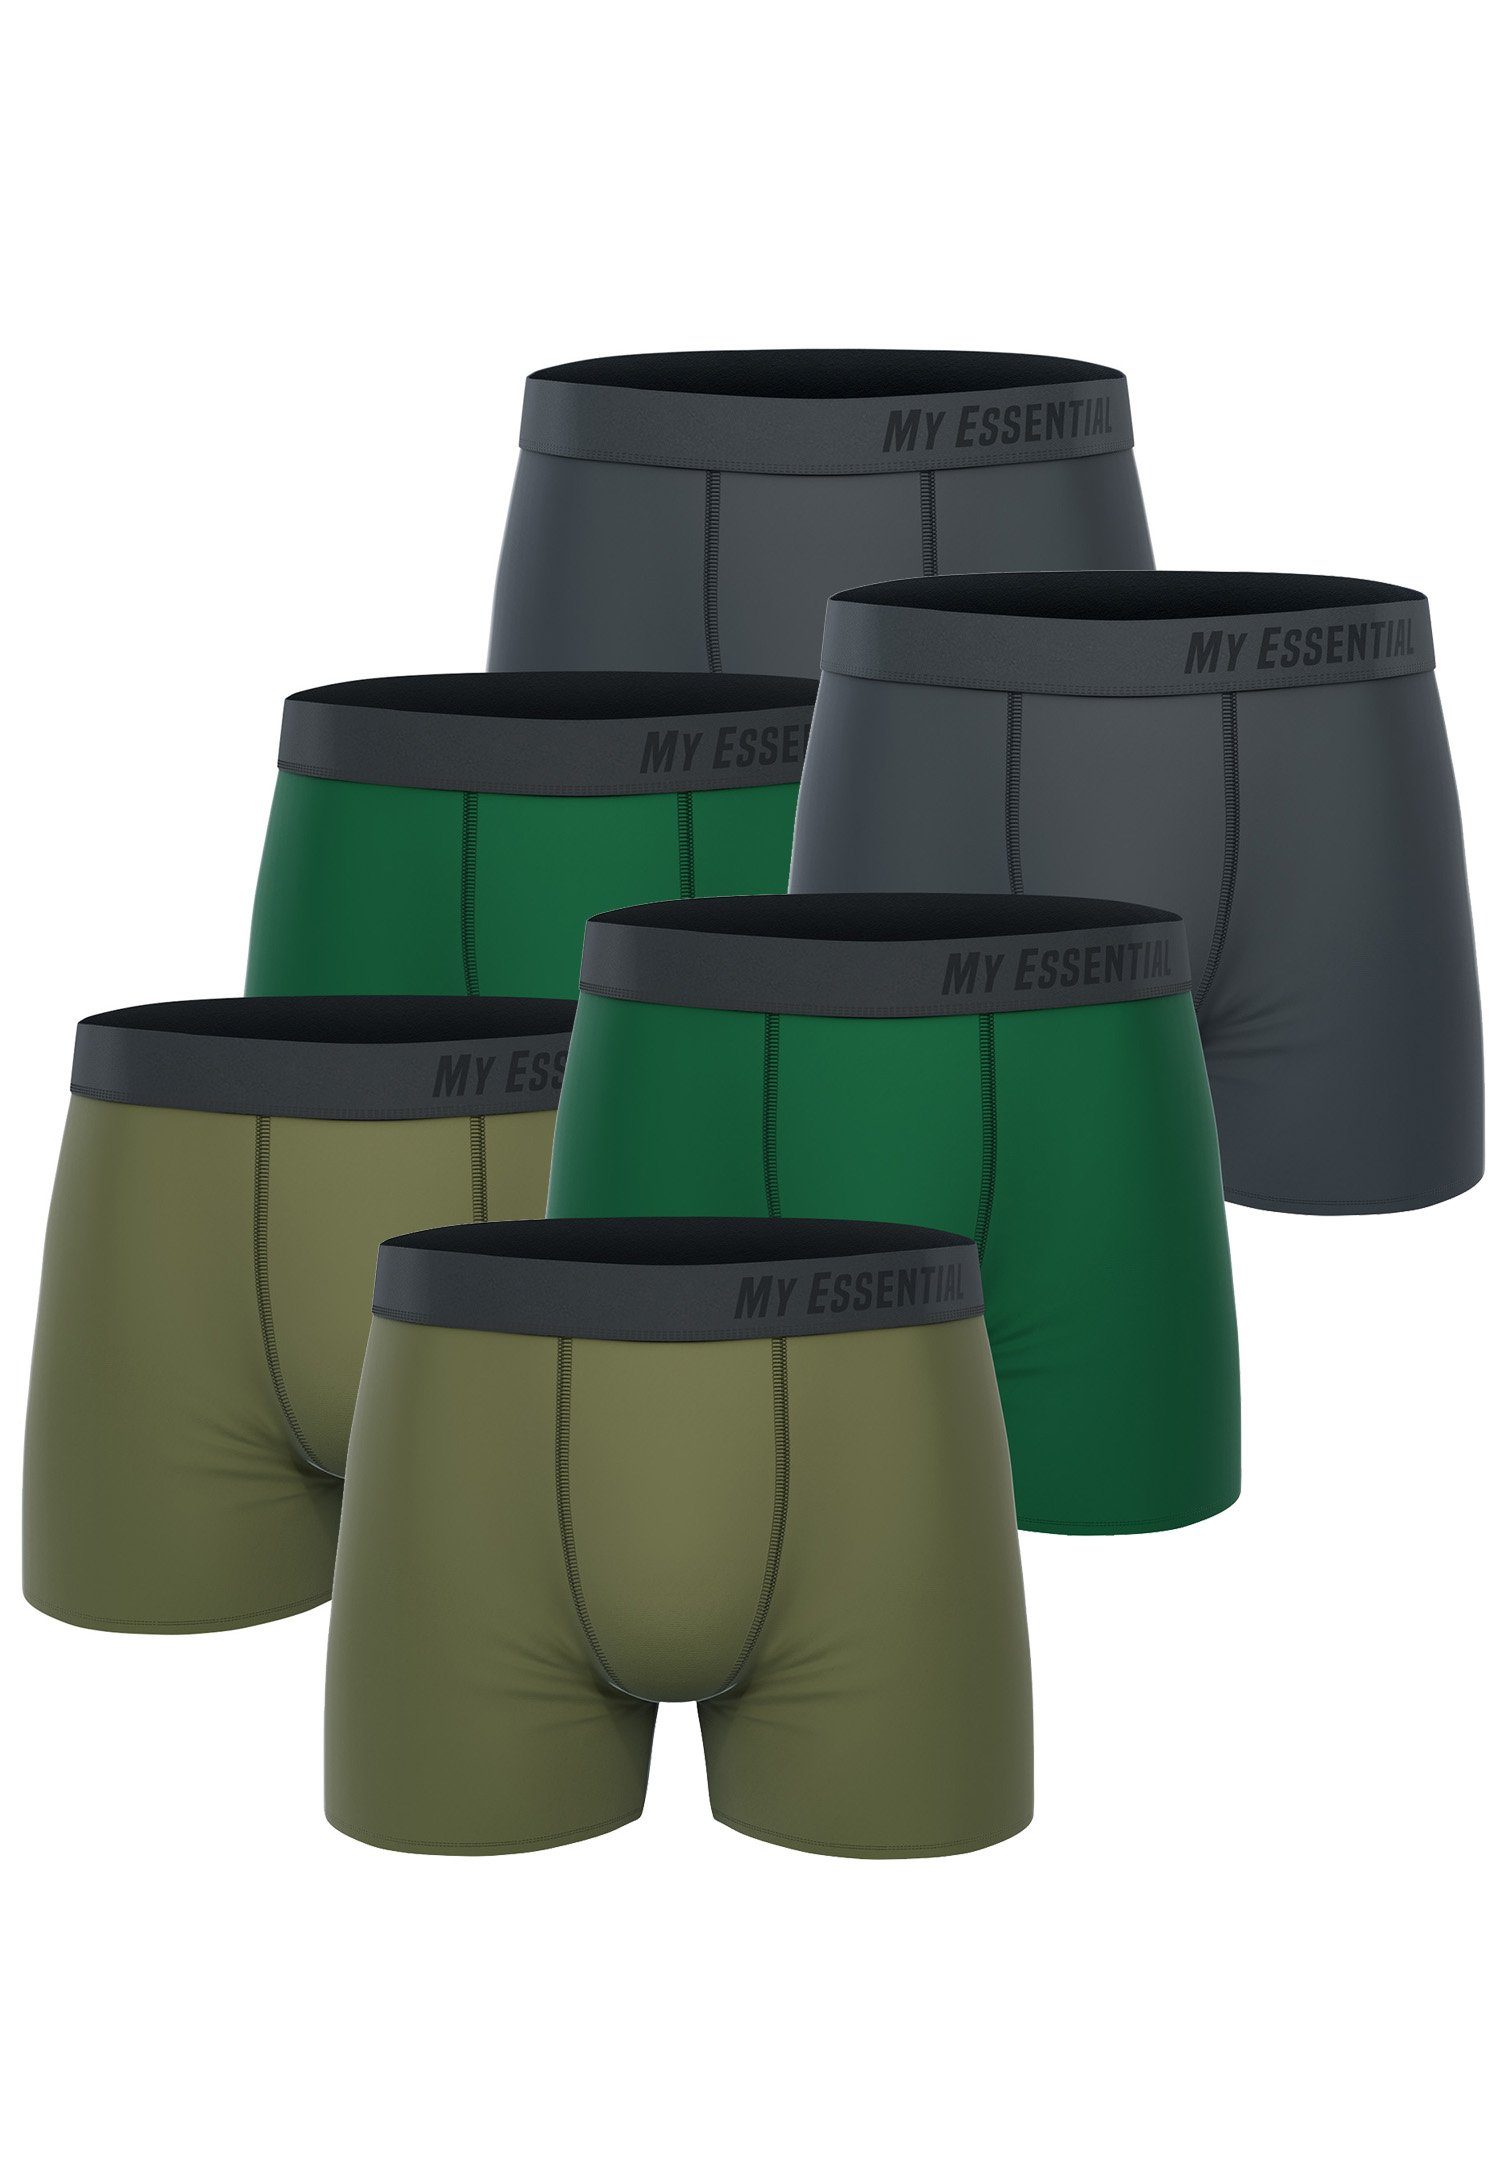 Essential Boxershorts Cotton Essential My My Bio Pack (Spar-Pack, 6er-Pack) Clothing 6-St., 6 Green Boxers